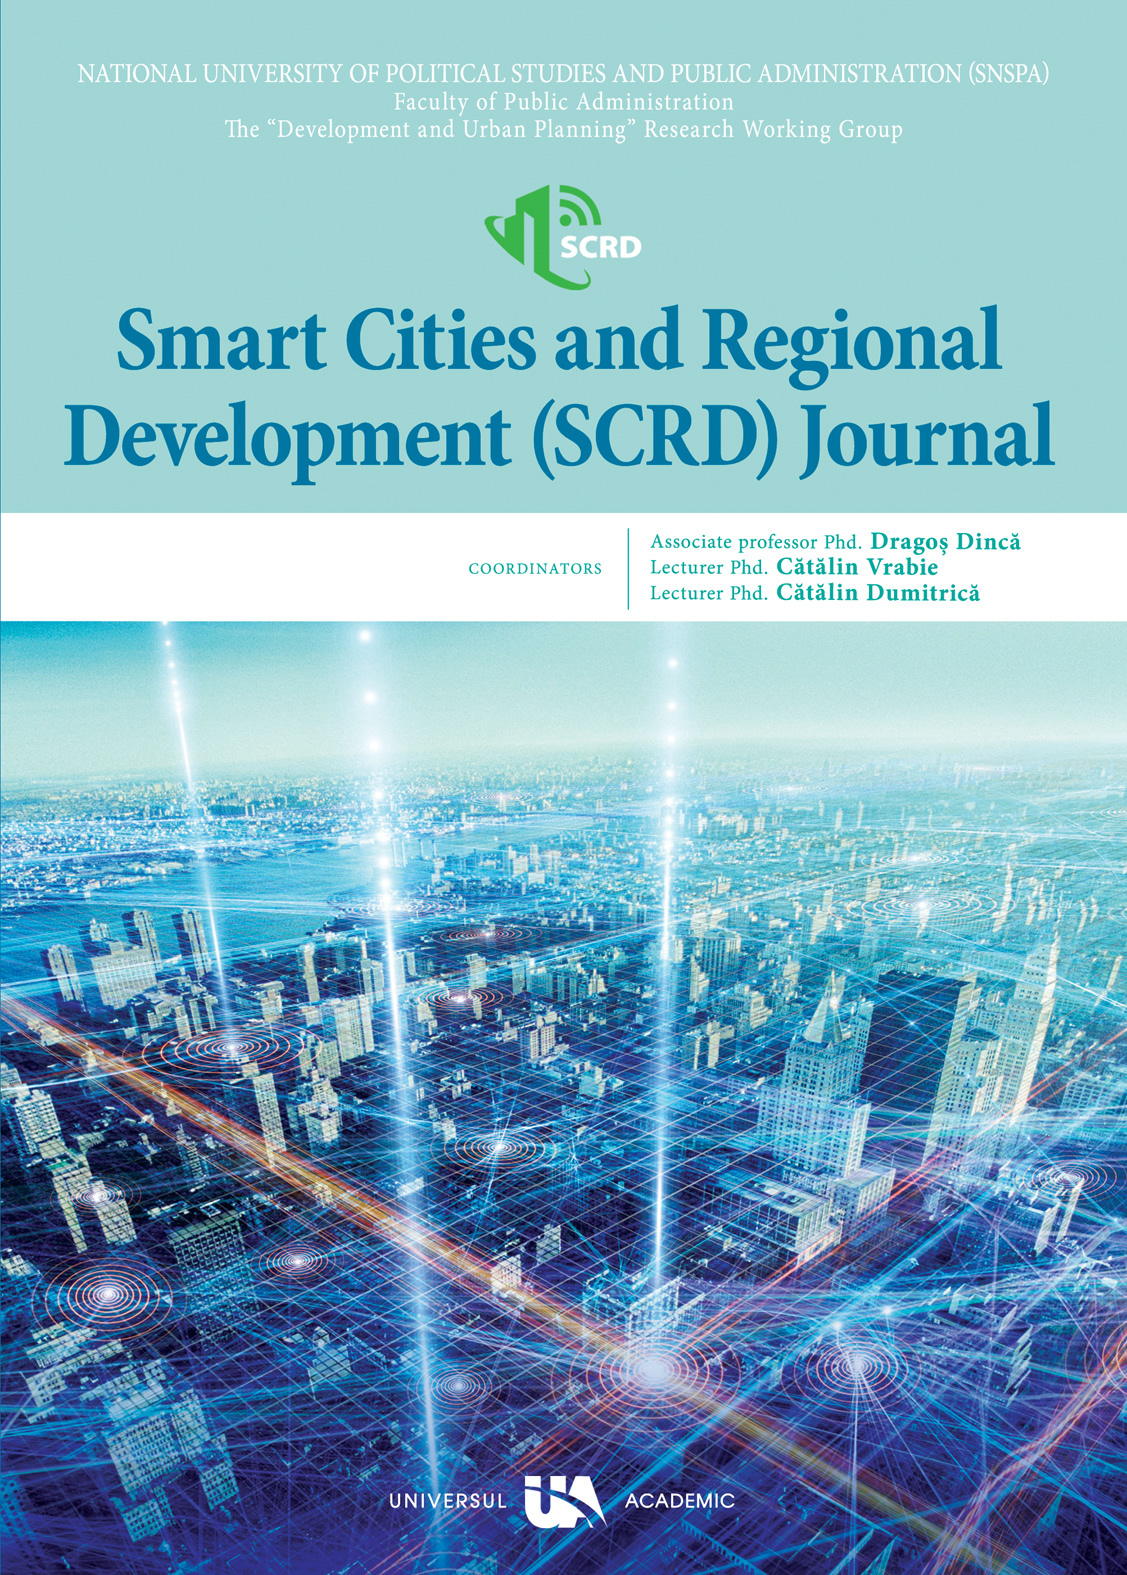 Digitalization and smartening sustainable city development: Cover Image